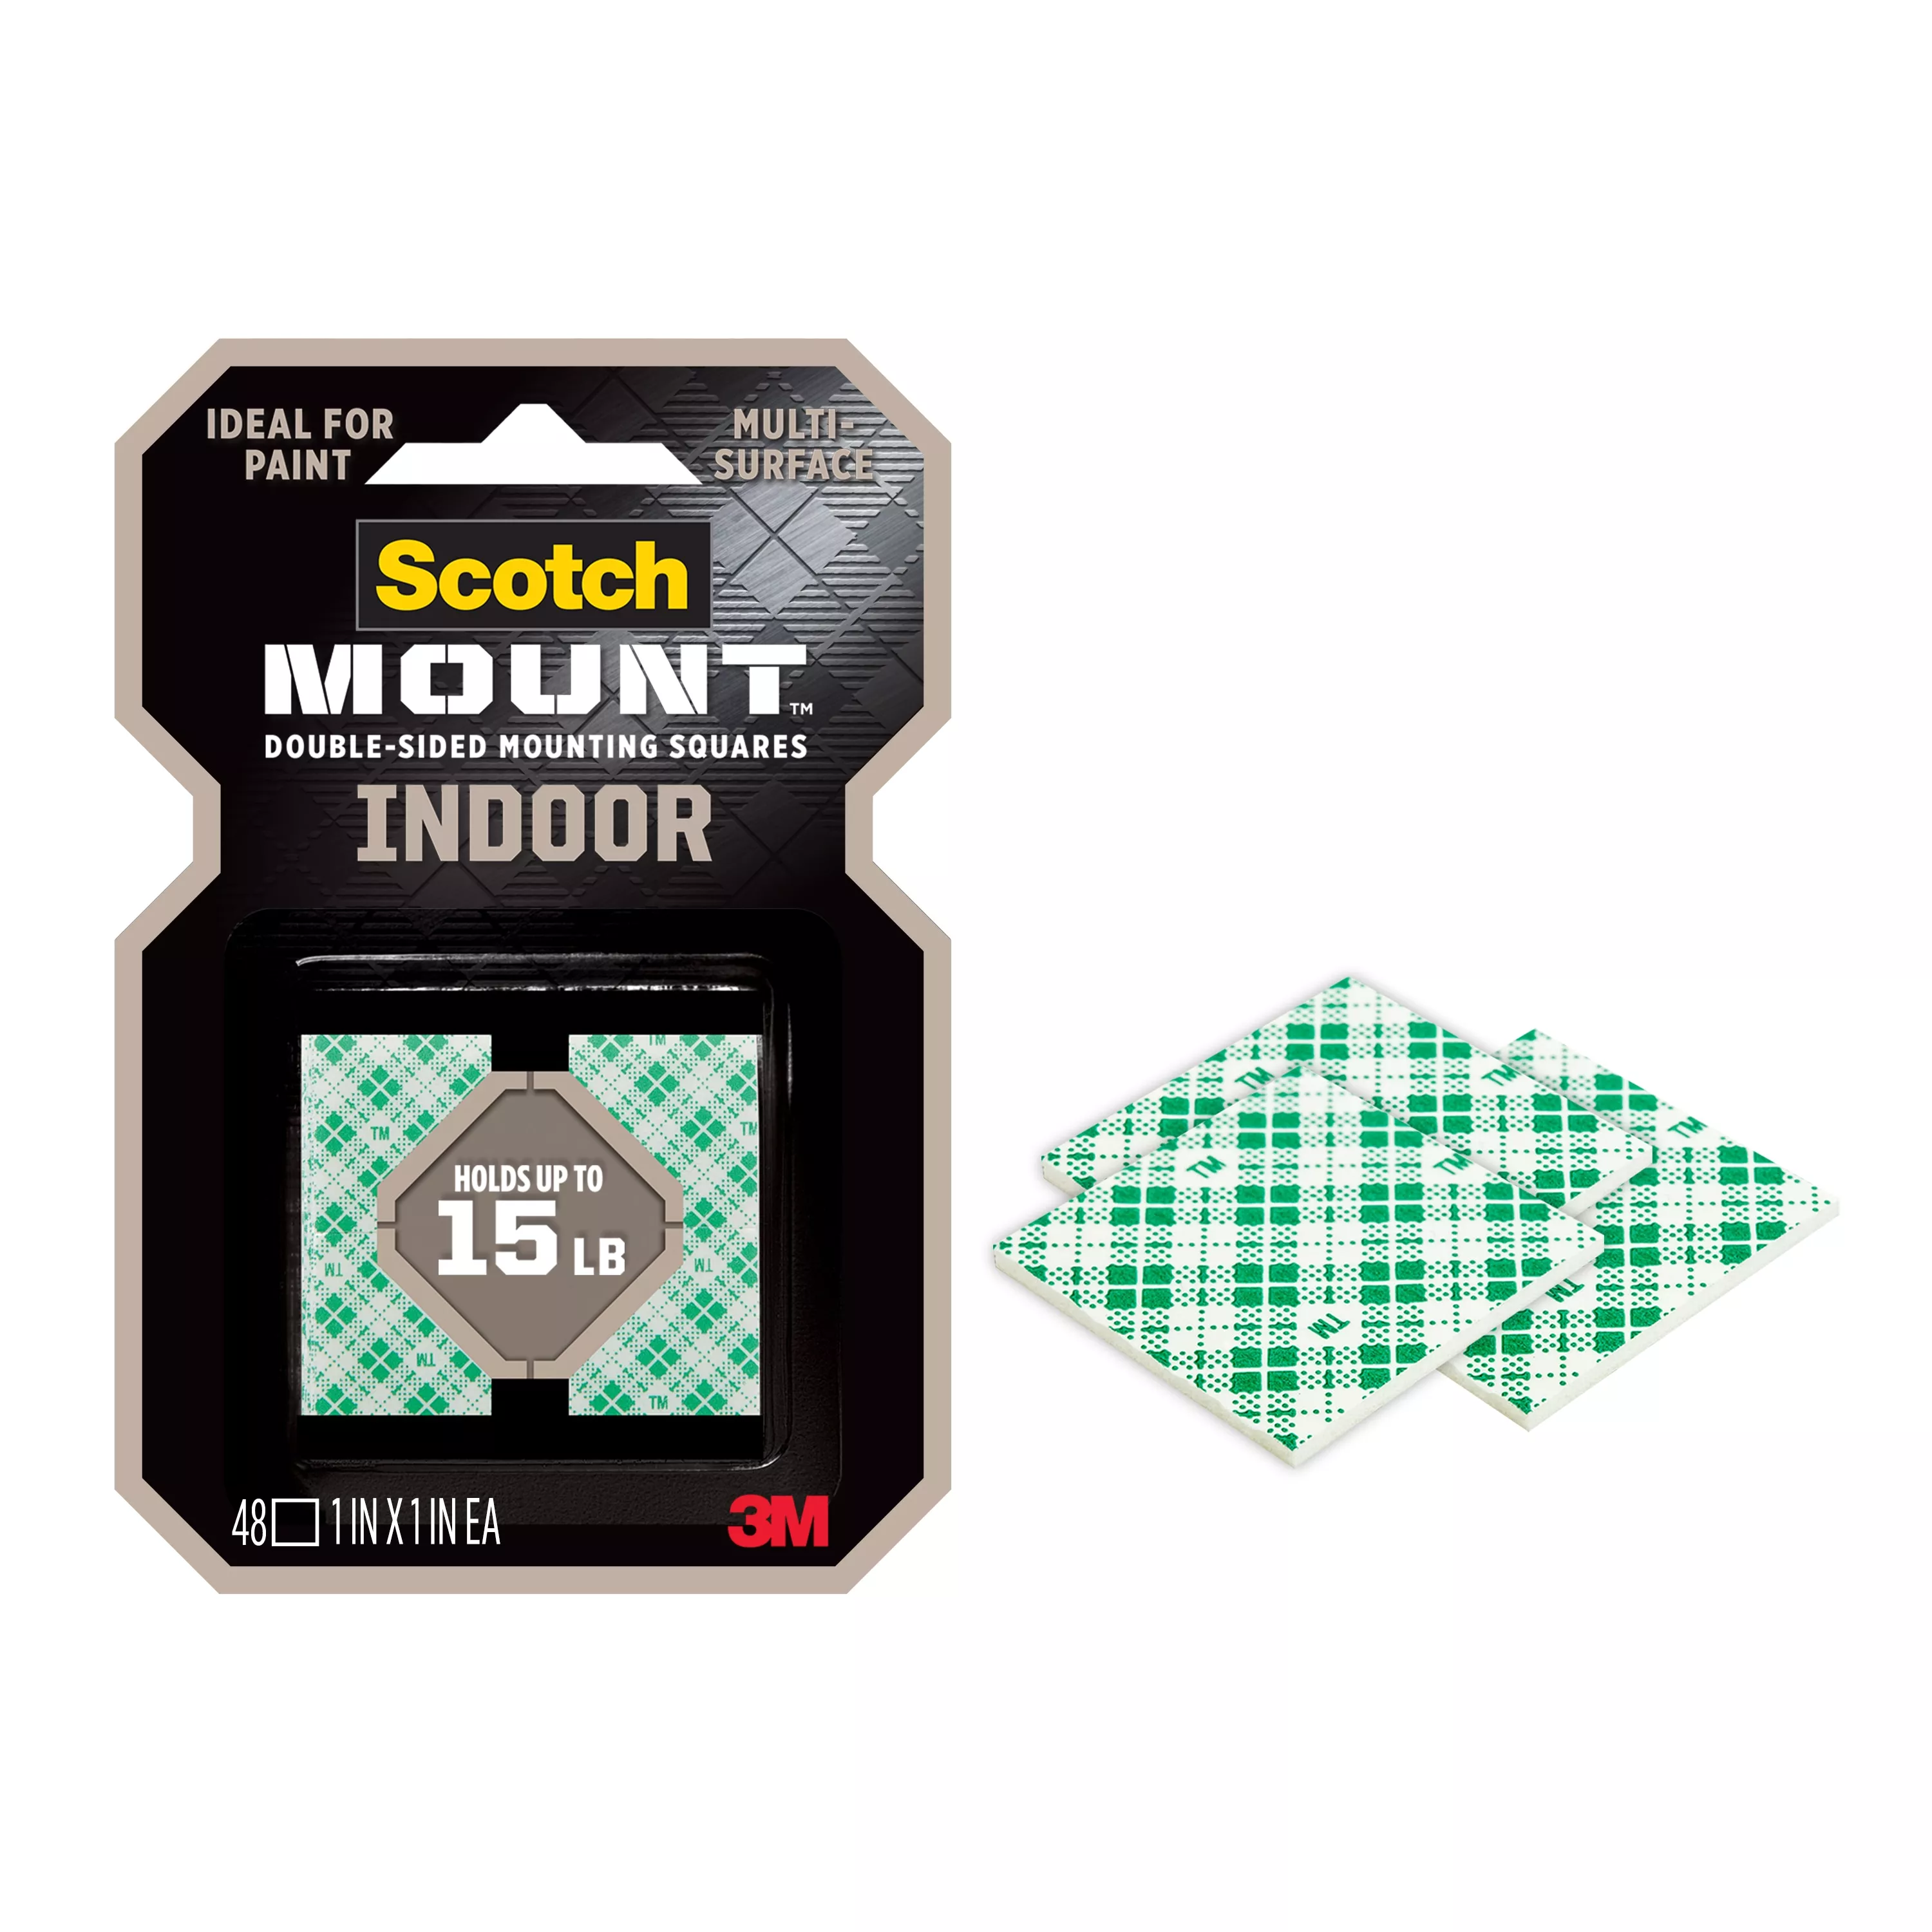 SKU 7100216179 | Scotch-Mount™ Indoor Double-Sided Mounting Squares 111H-SQ-48-DC